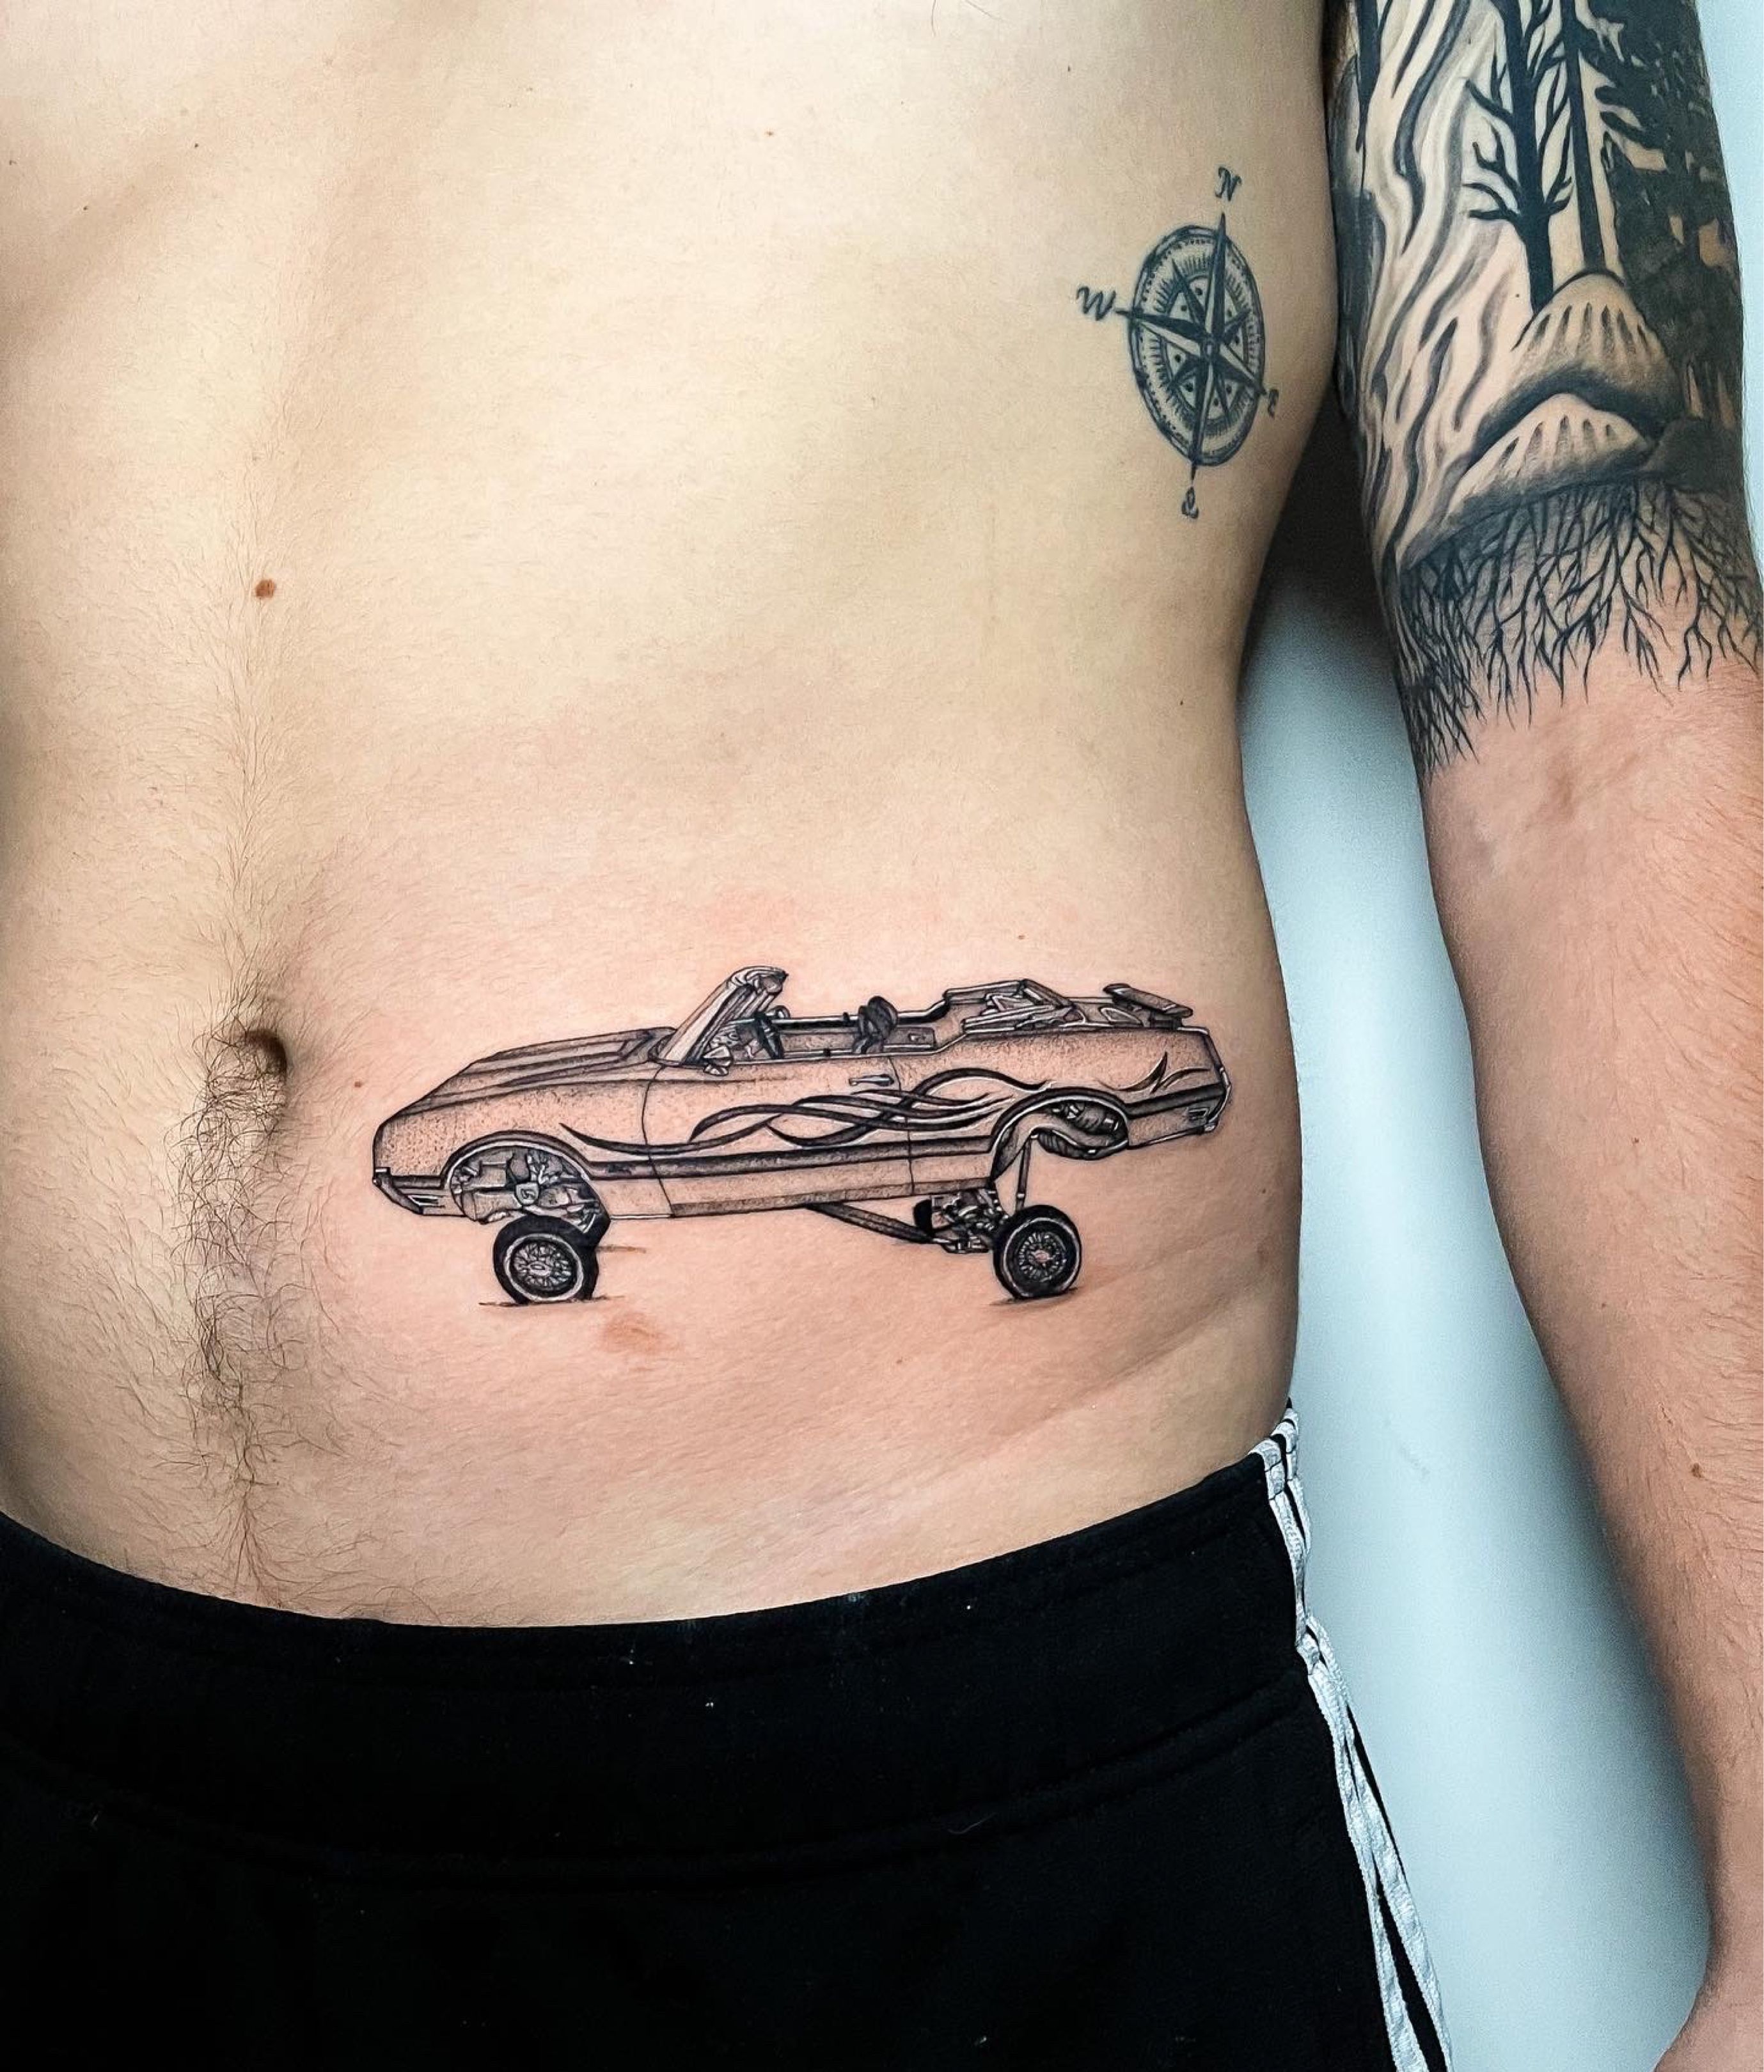 Thought Id share my latest tattoos Planned way before the Thelma and  Louise announcement but ended up getting them in the same week   rcriterion